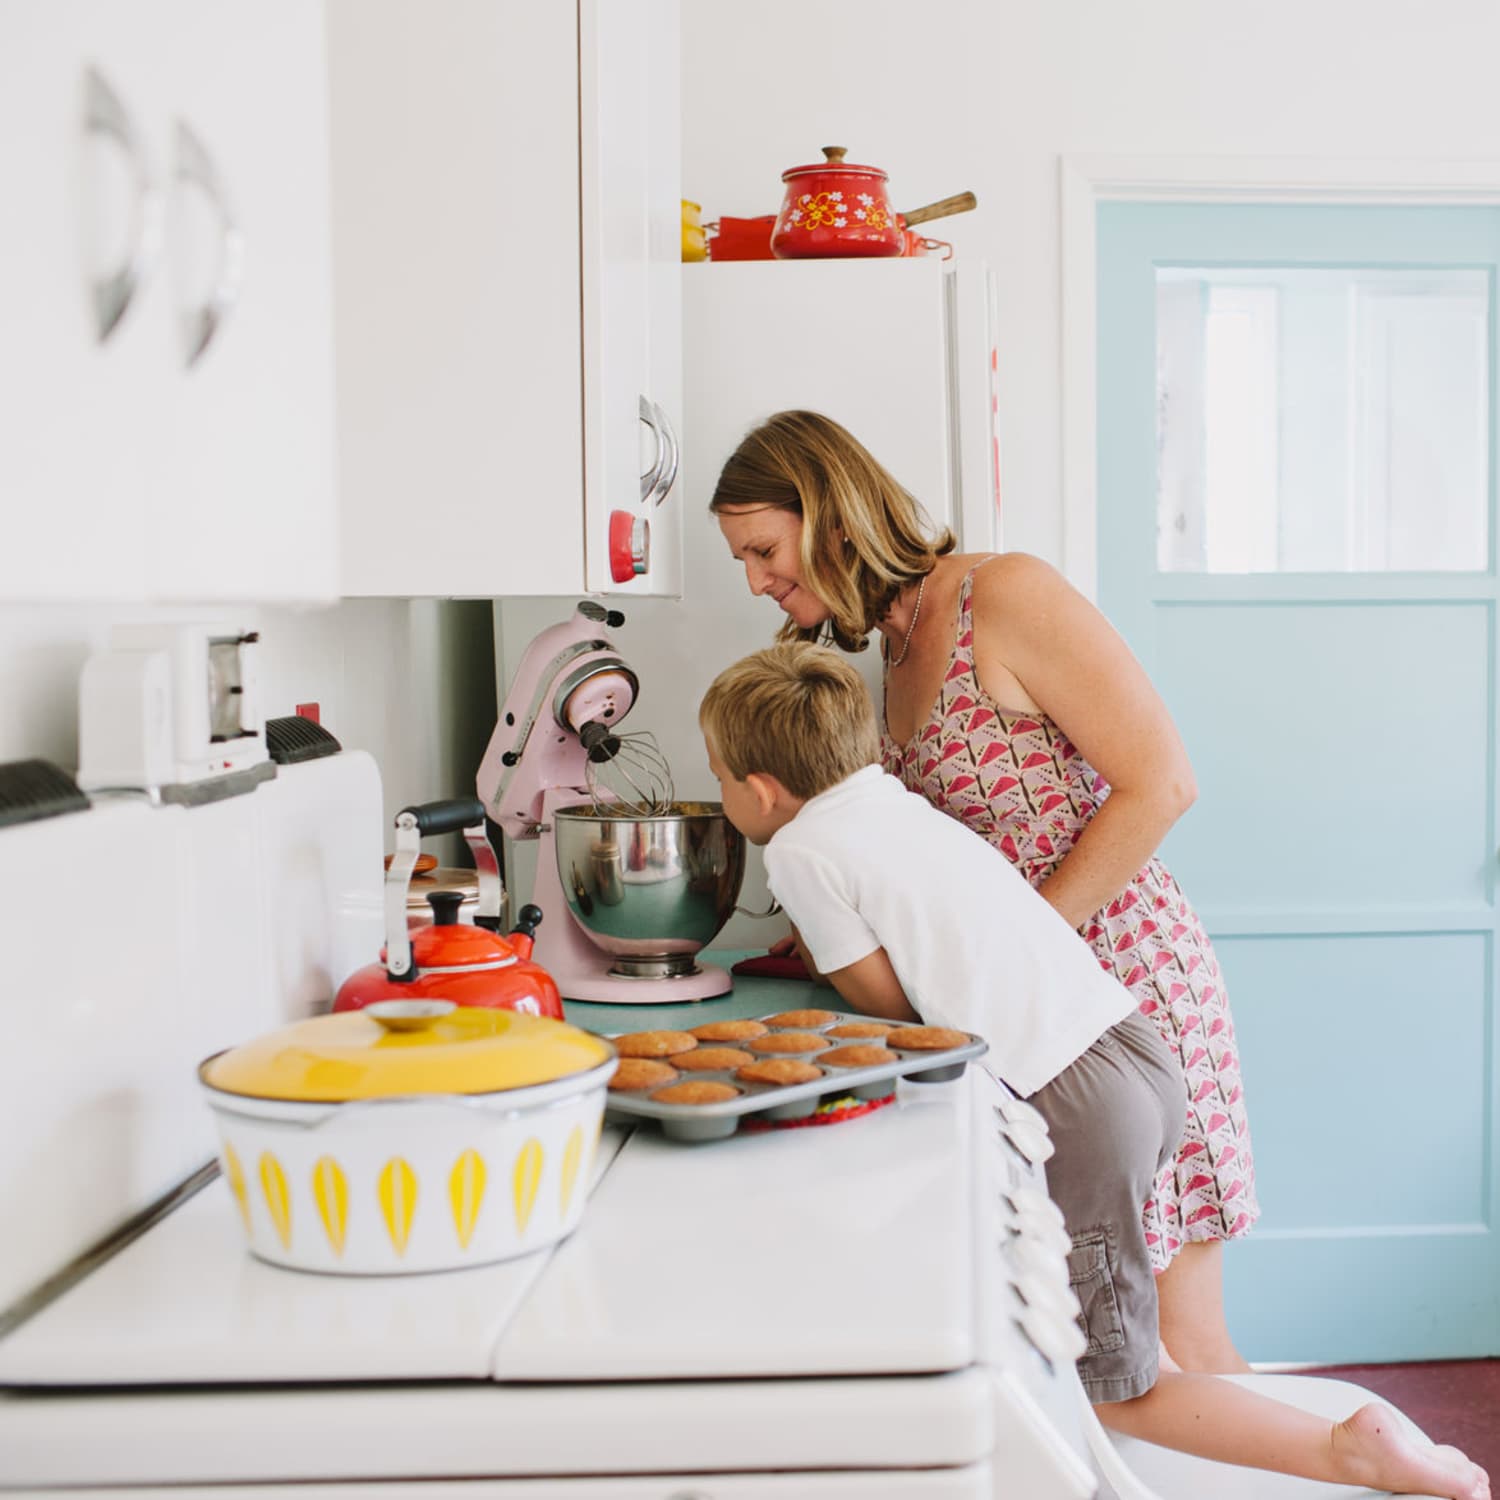 How to Keep Small Appliances Out in Your Kitchen